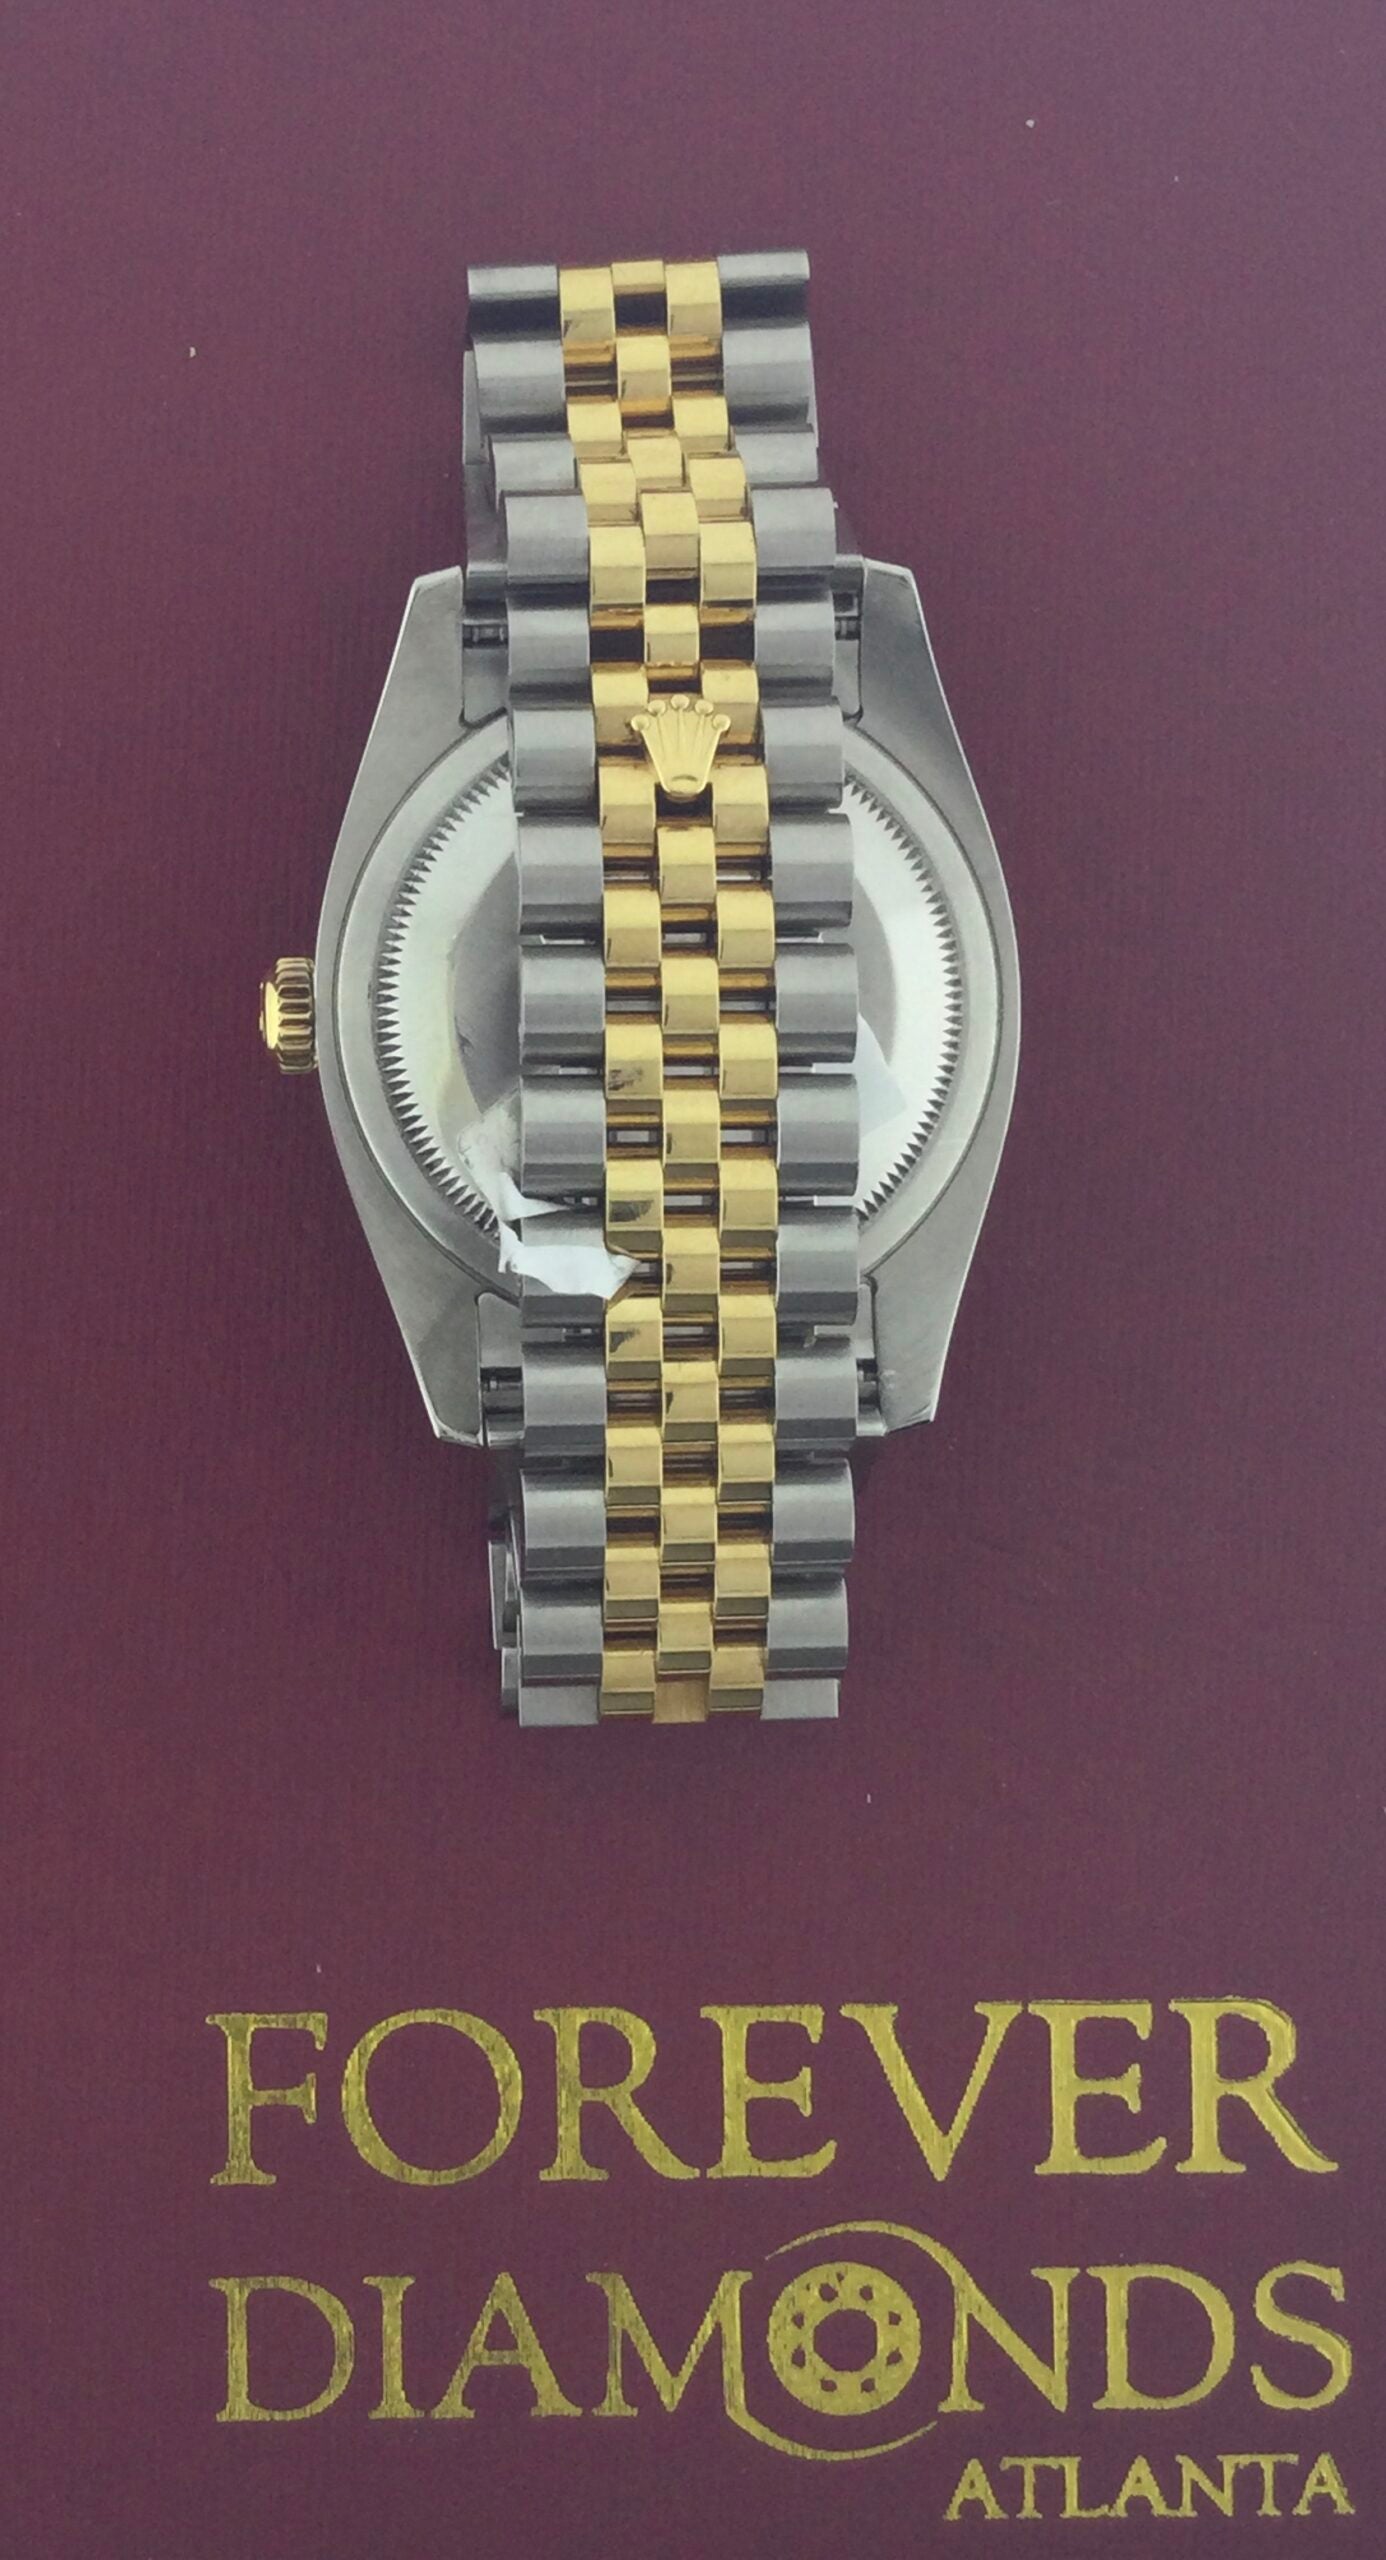 Rolex 36MM Two-tone